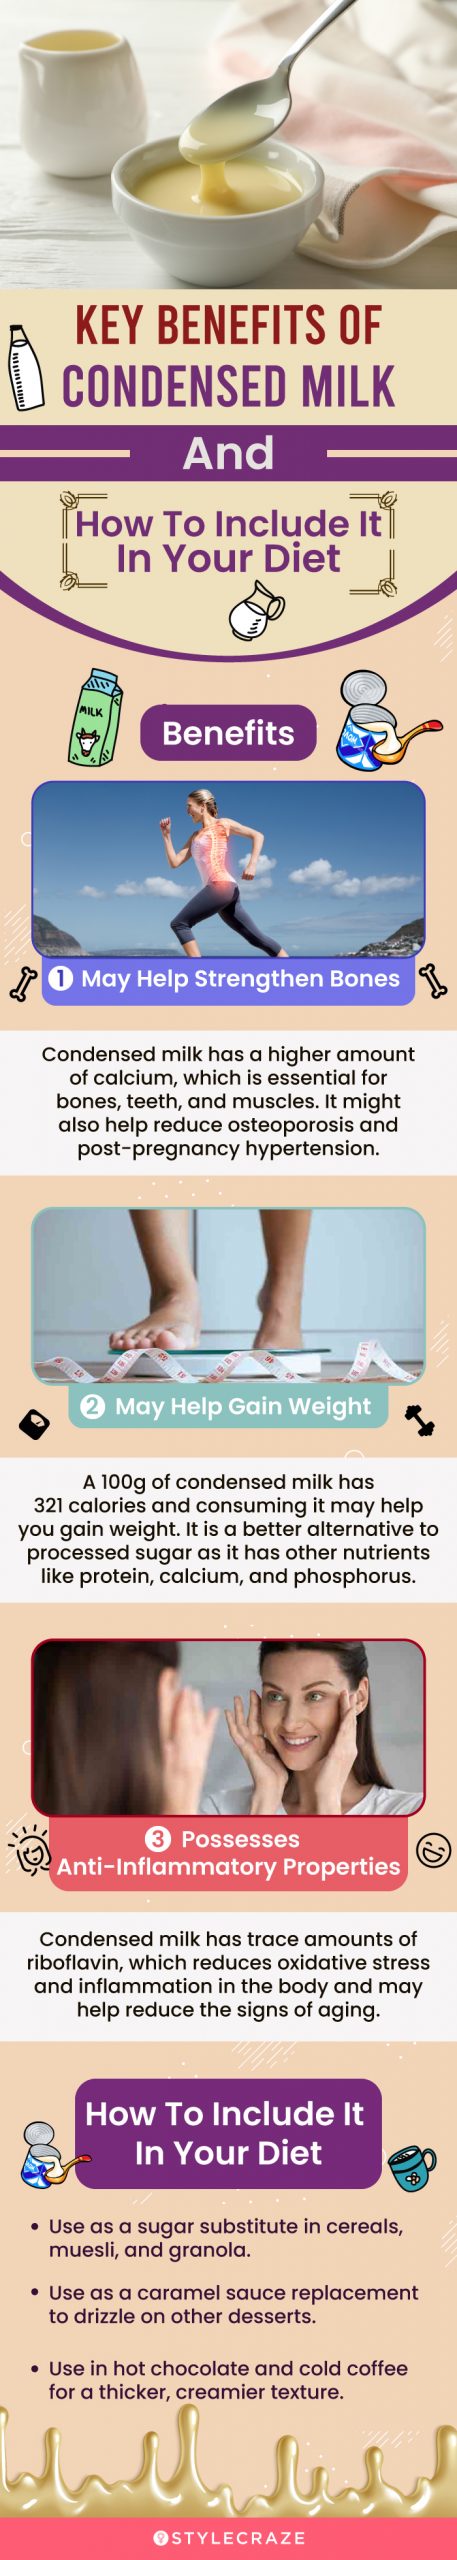 key benefits of condensed milk and how to use it in your diet (infographic)